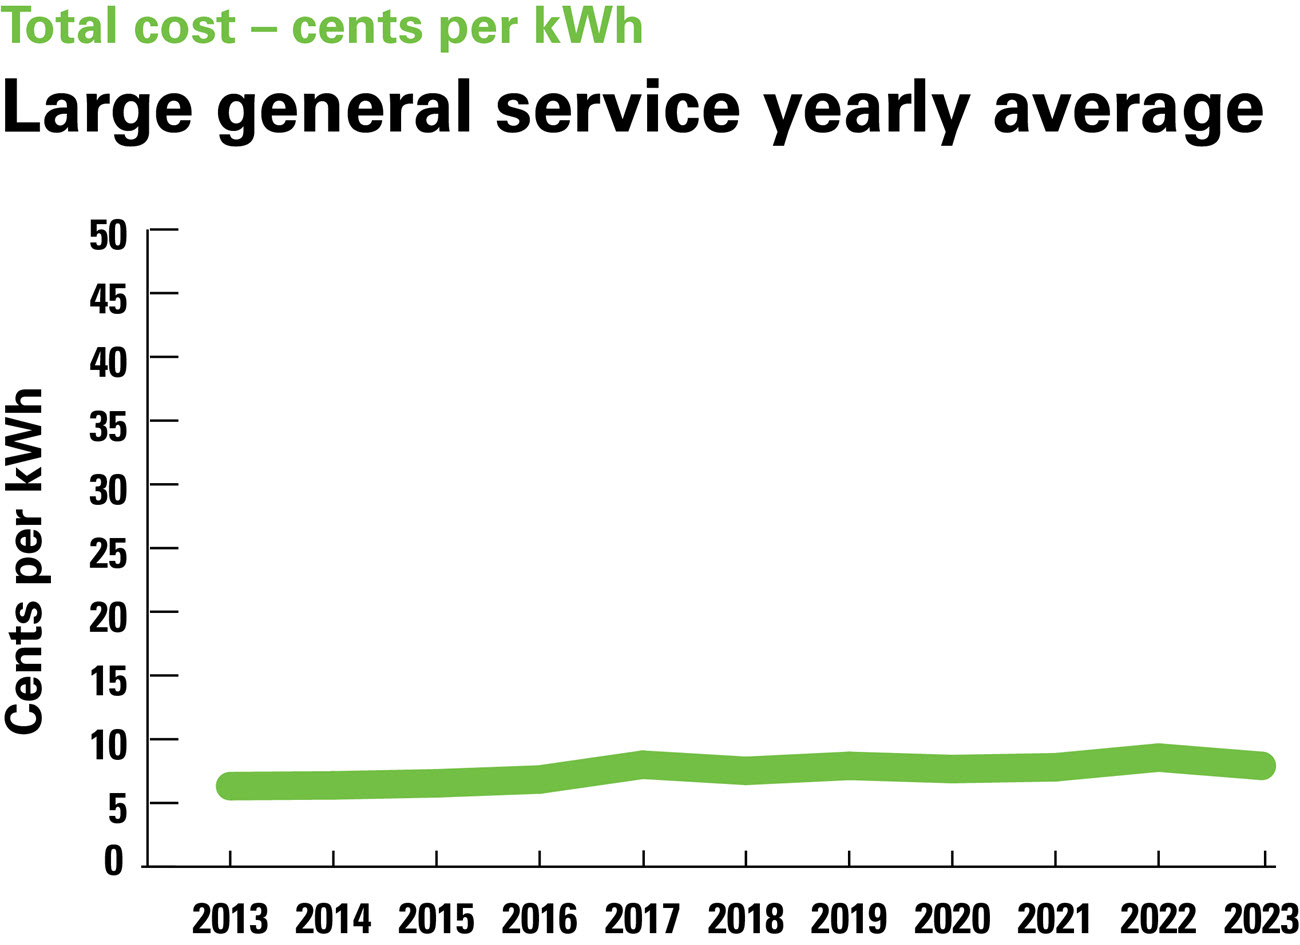 Line graph showing large general service yearly average total cost in cents per Kwh 